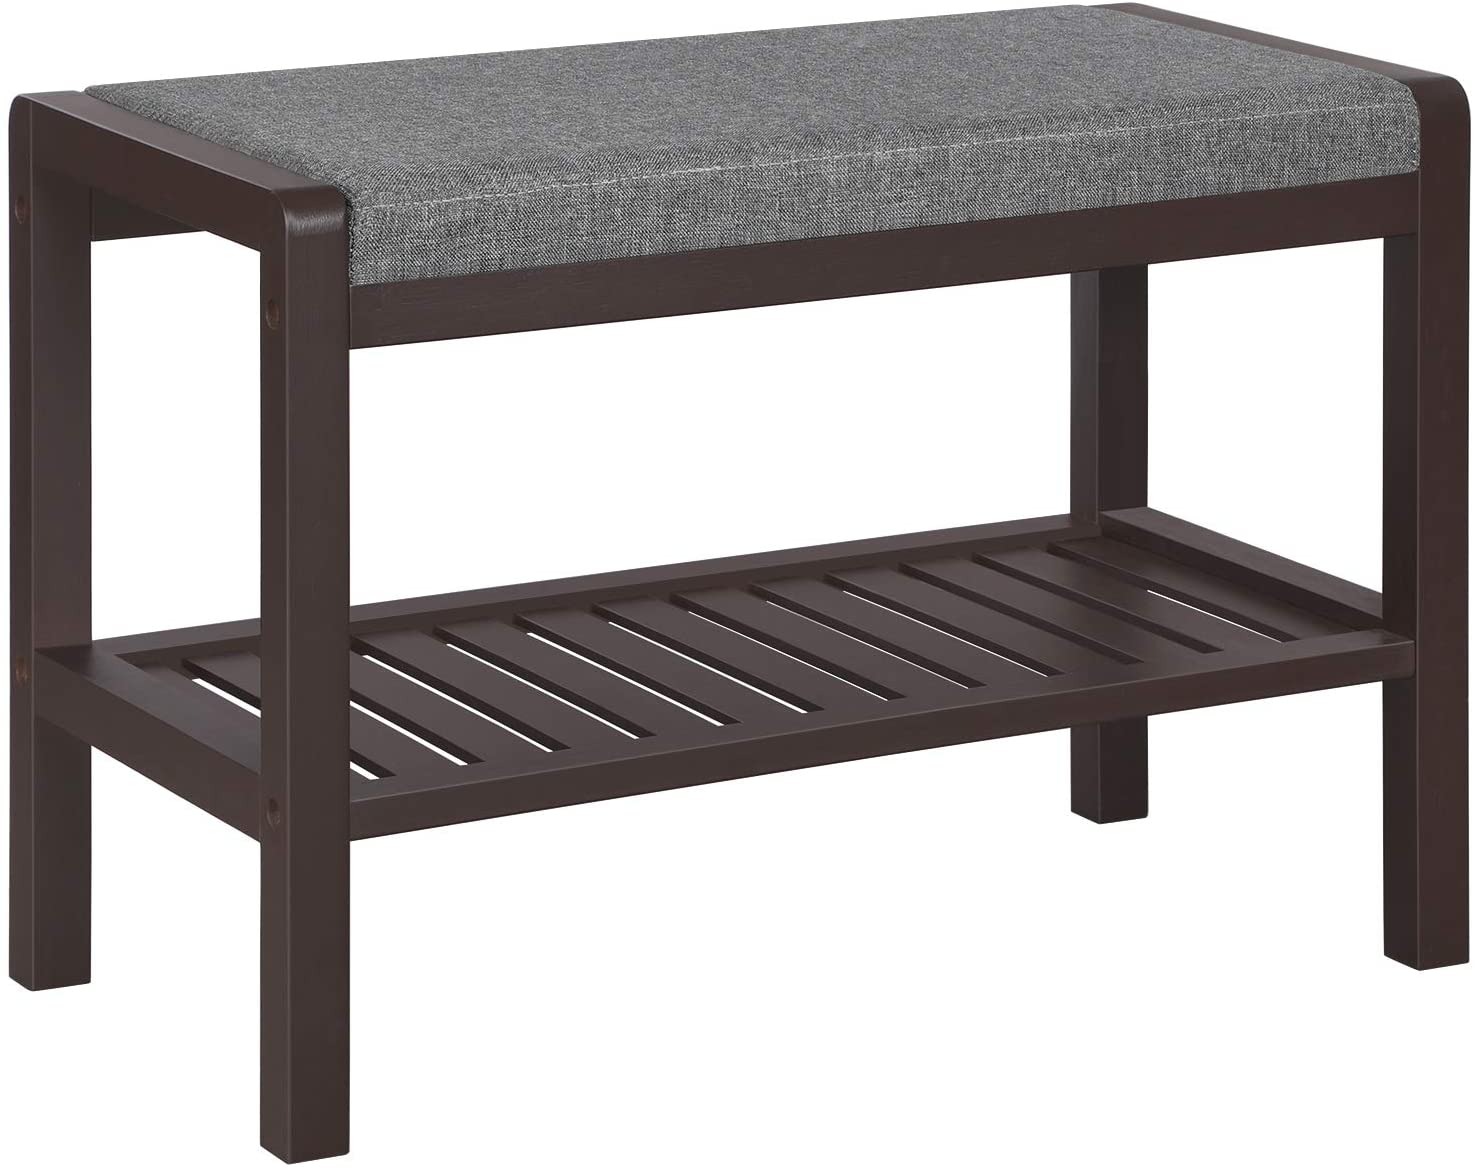 Benches Cushion Upholstered Padded Seat Storage Shelf Bench for Entryway Bedroom Living Room Hallway Garage